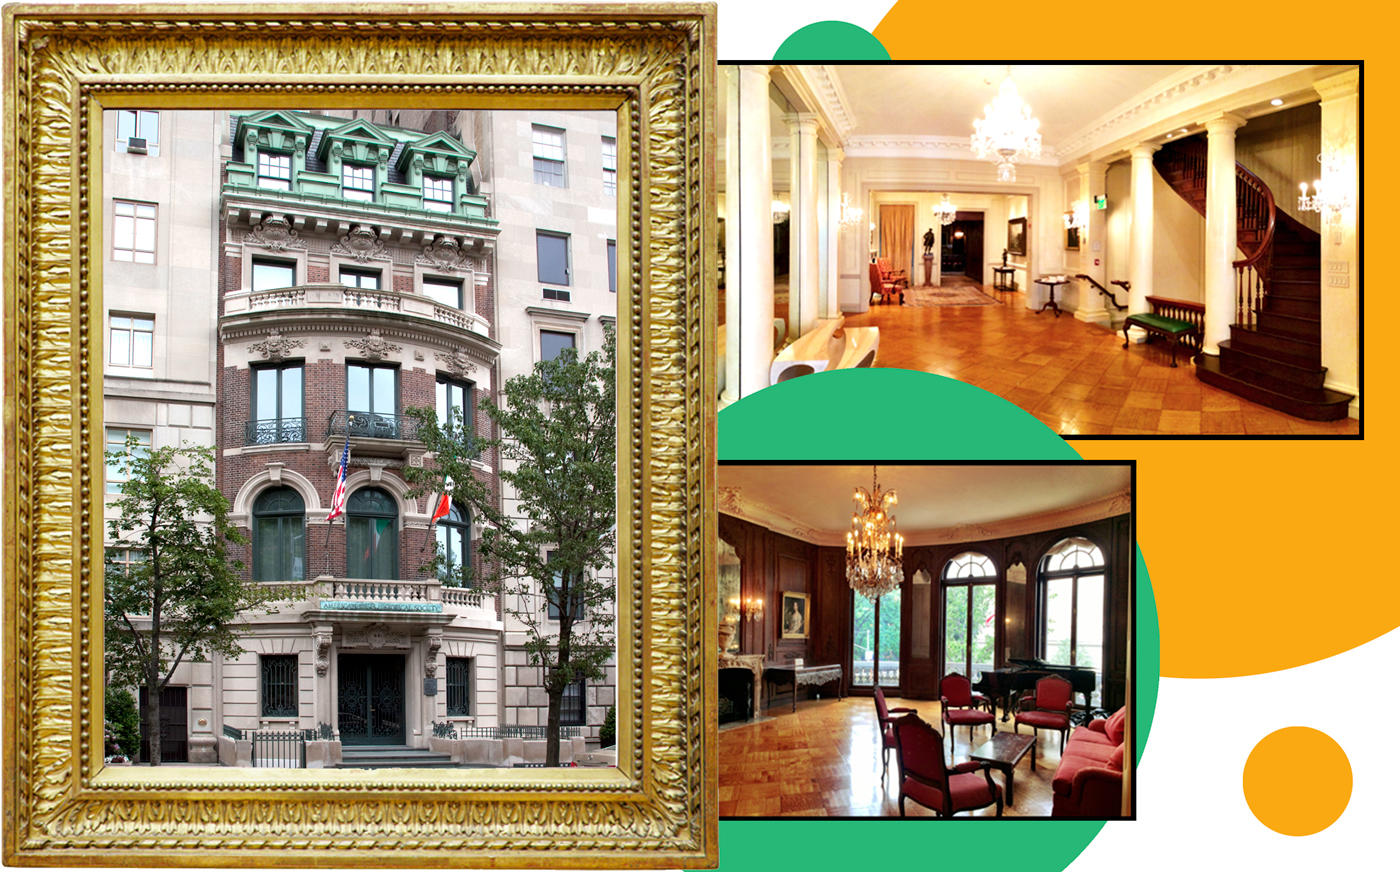 991 5th Avenue (Photos via Gryffindor/Wikipedia Commons and the American Irish Historical Society)